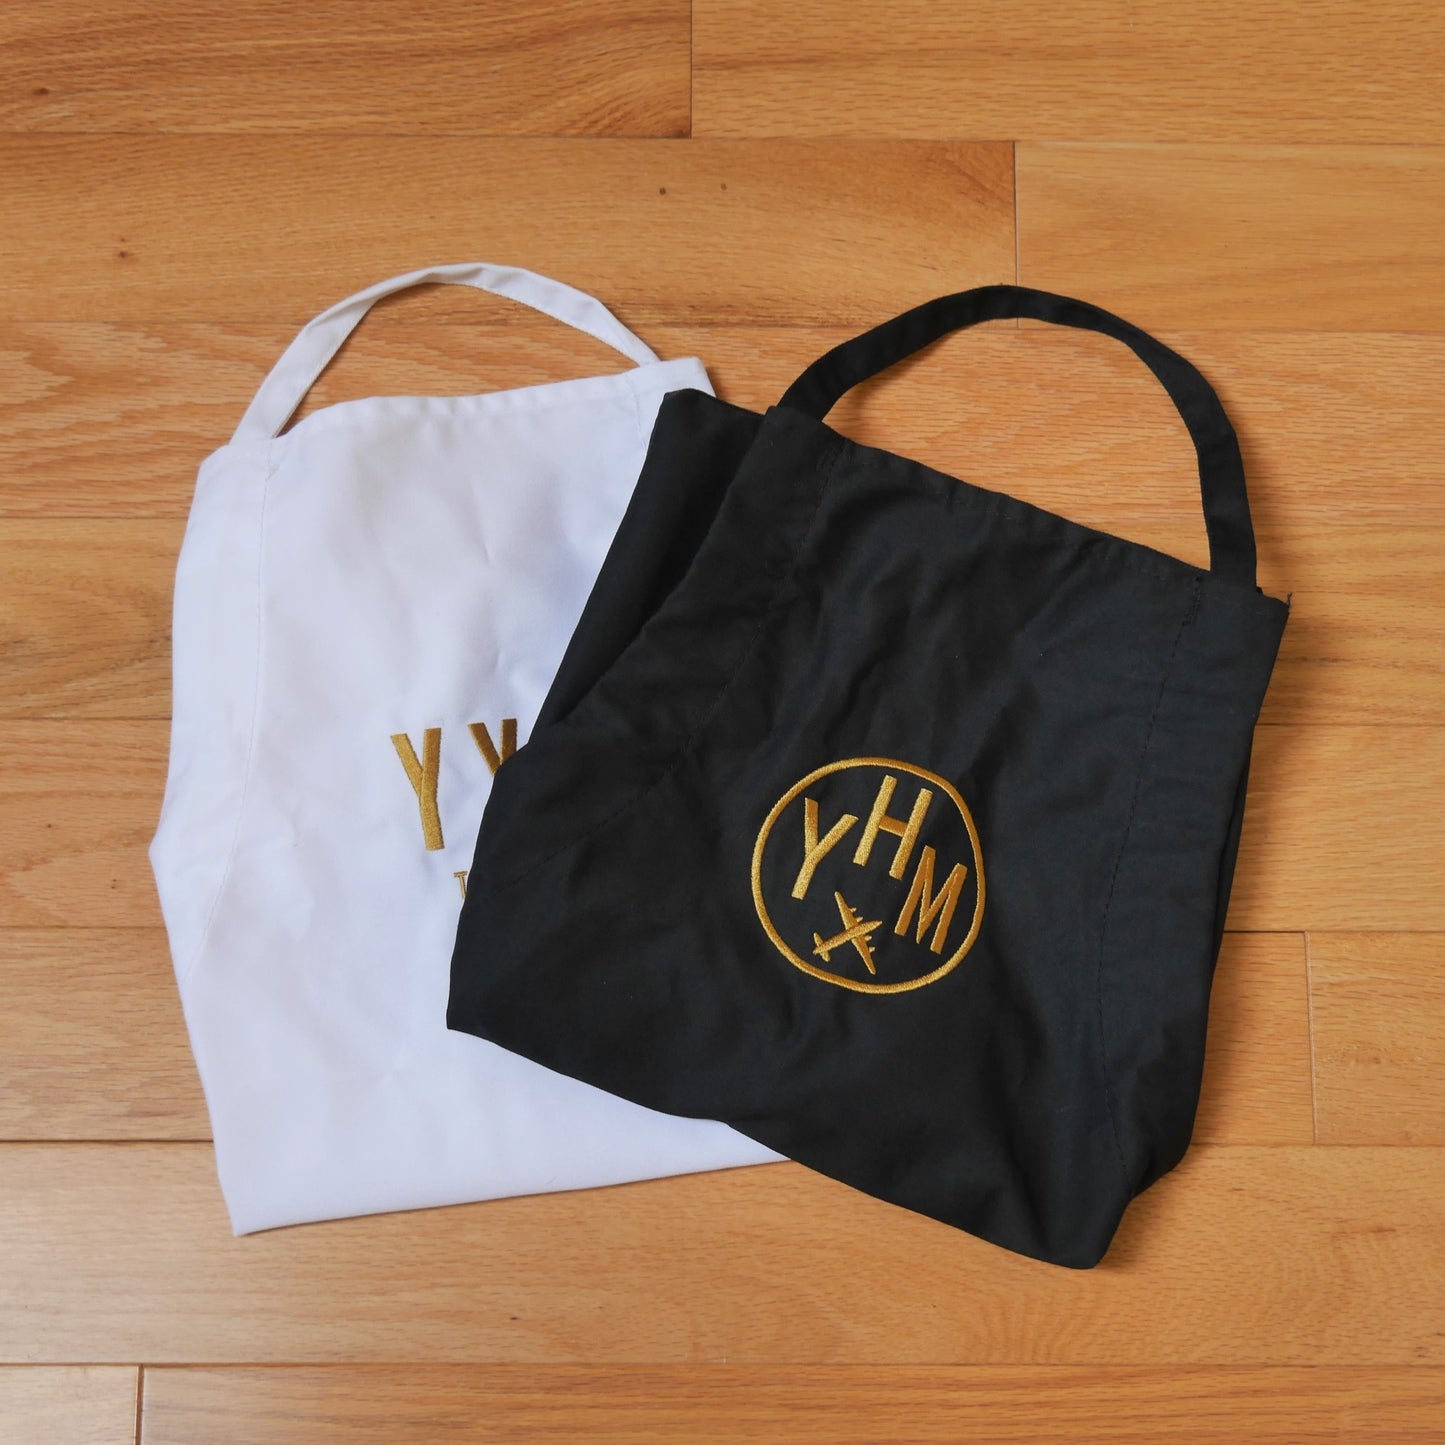 City Embroidered Apron - Old Gold • ABQ Albuquerque • YHM Designs - Image 14